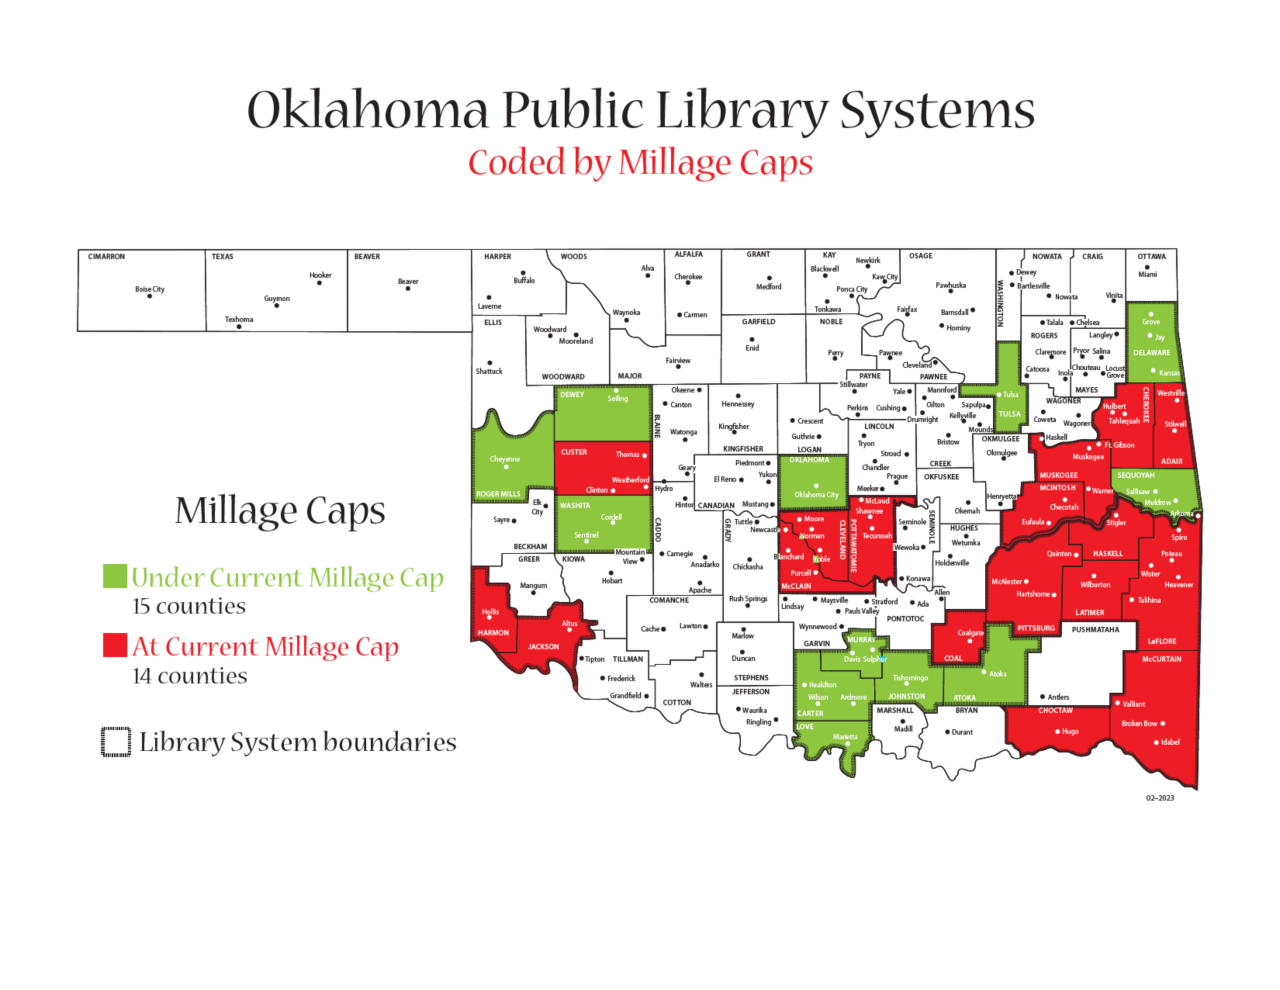 Oklahoma Public Library Systems Coded by Millage Caps